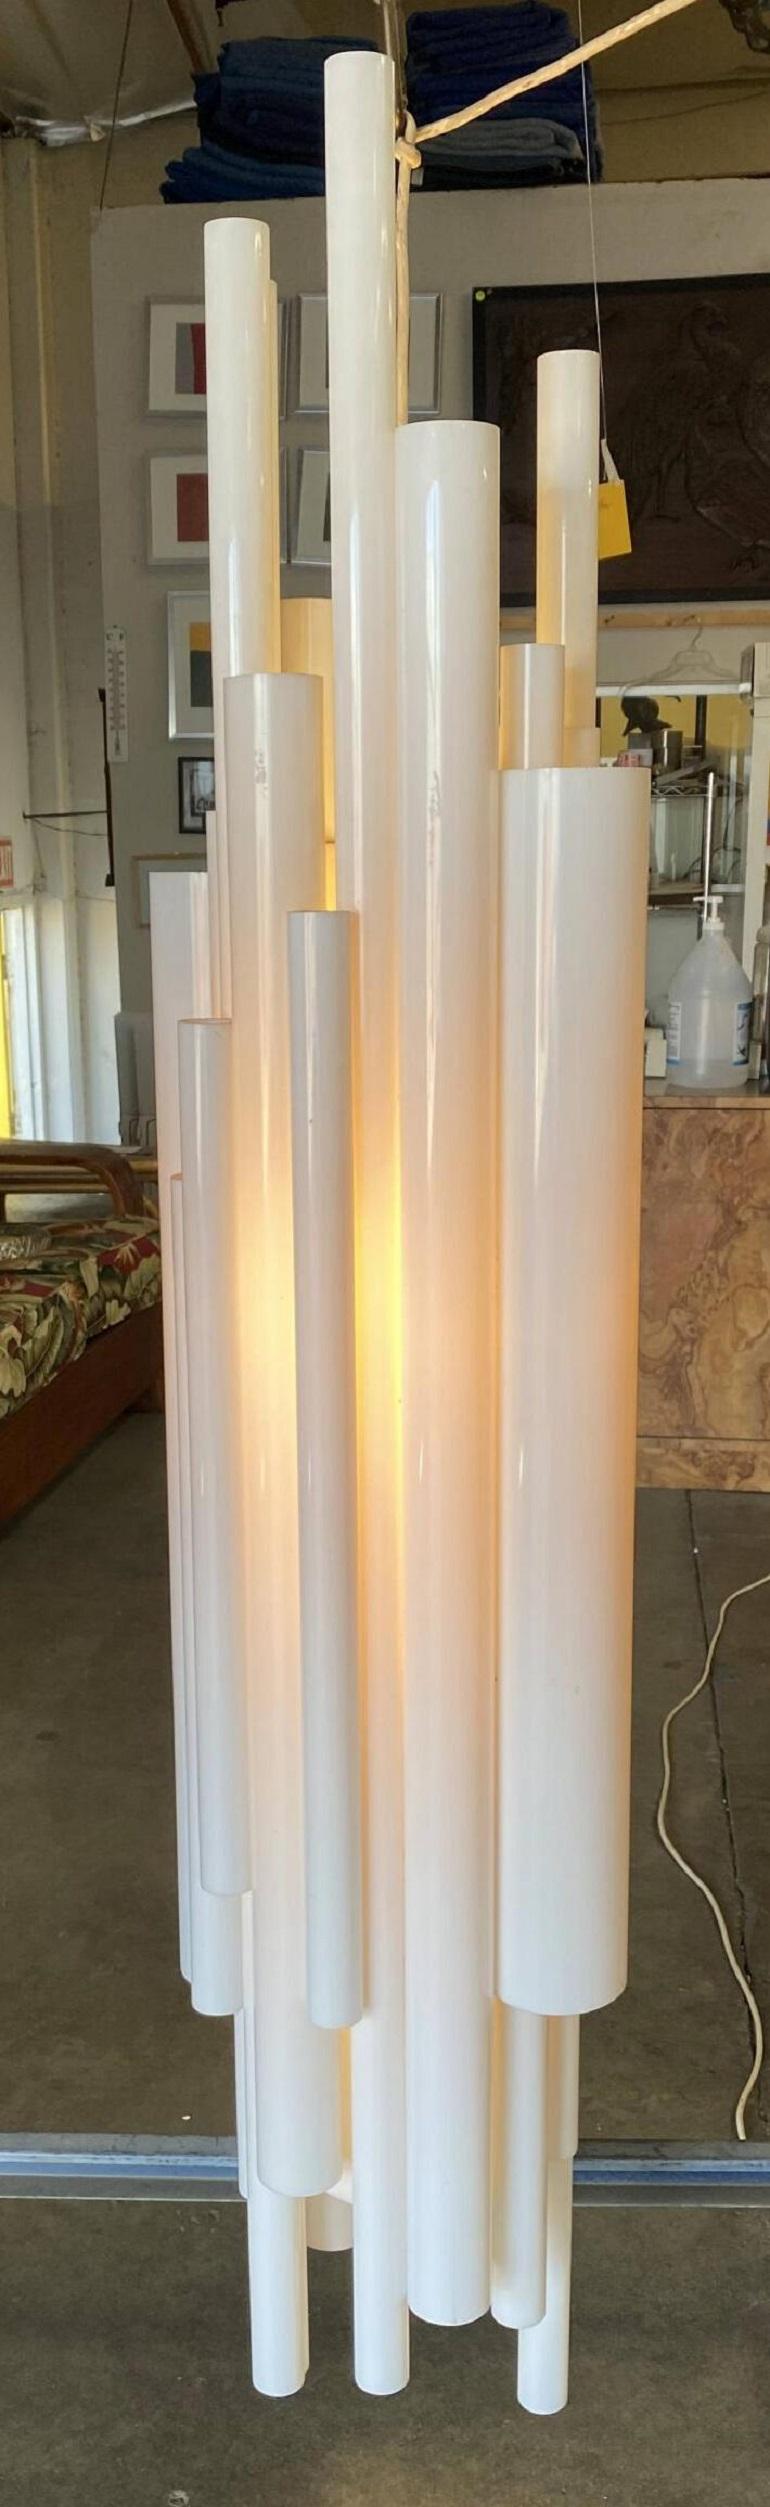 Made in the USA, this gorgeous lucite tube chandelier features a brass hanger with several layers of asymmetric lucite tubes. The light glistens through the white Lucite tubes, which are uniform in shape and size.

Transport your space back to the